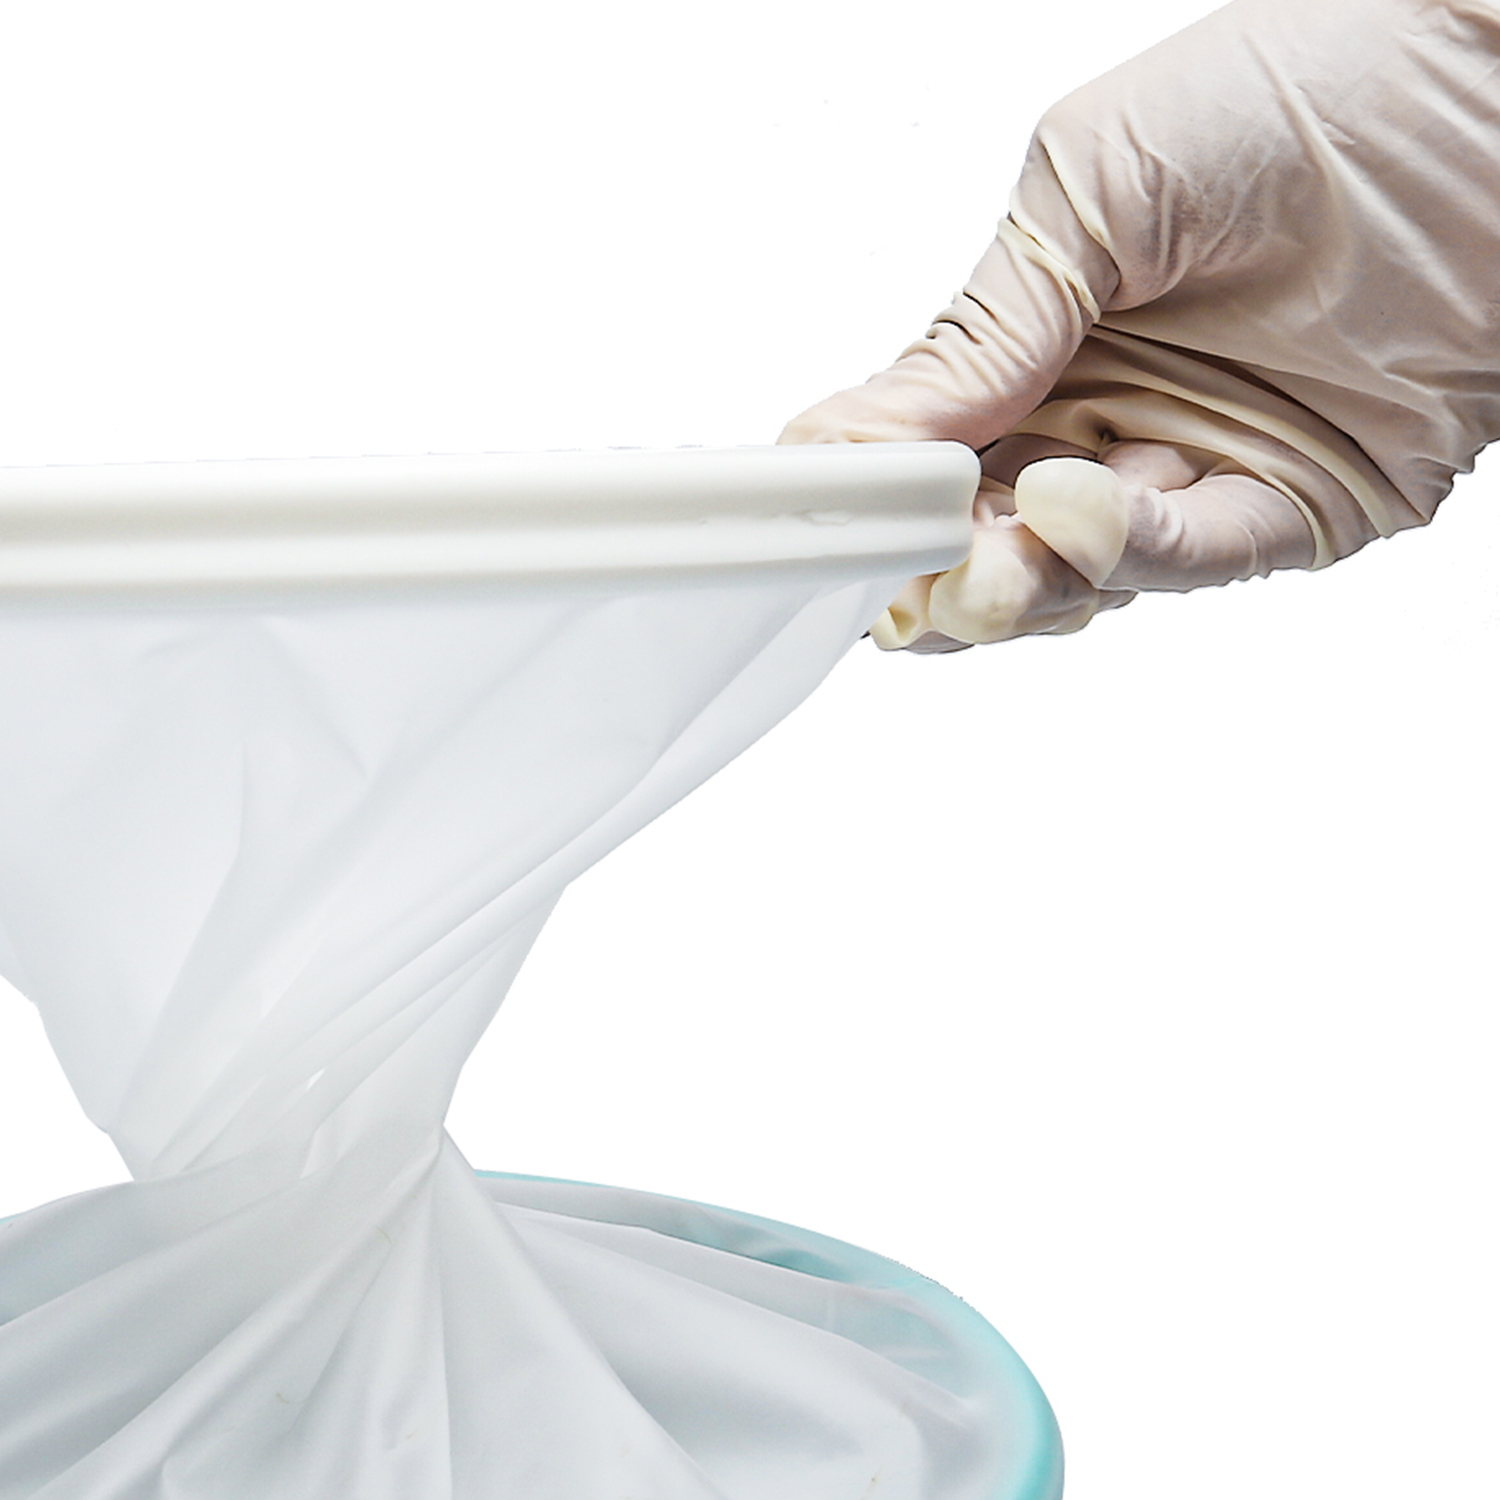 Preventing Bleeding Disposable Incision Sleeve With CE